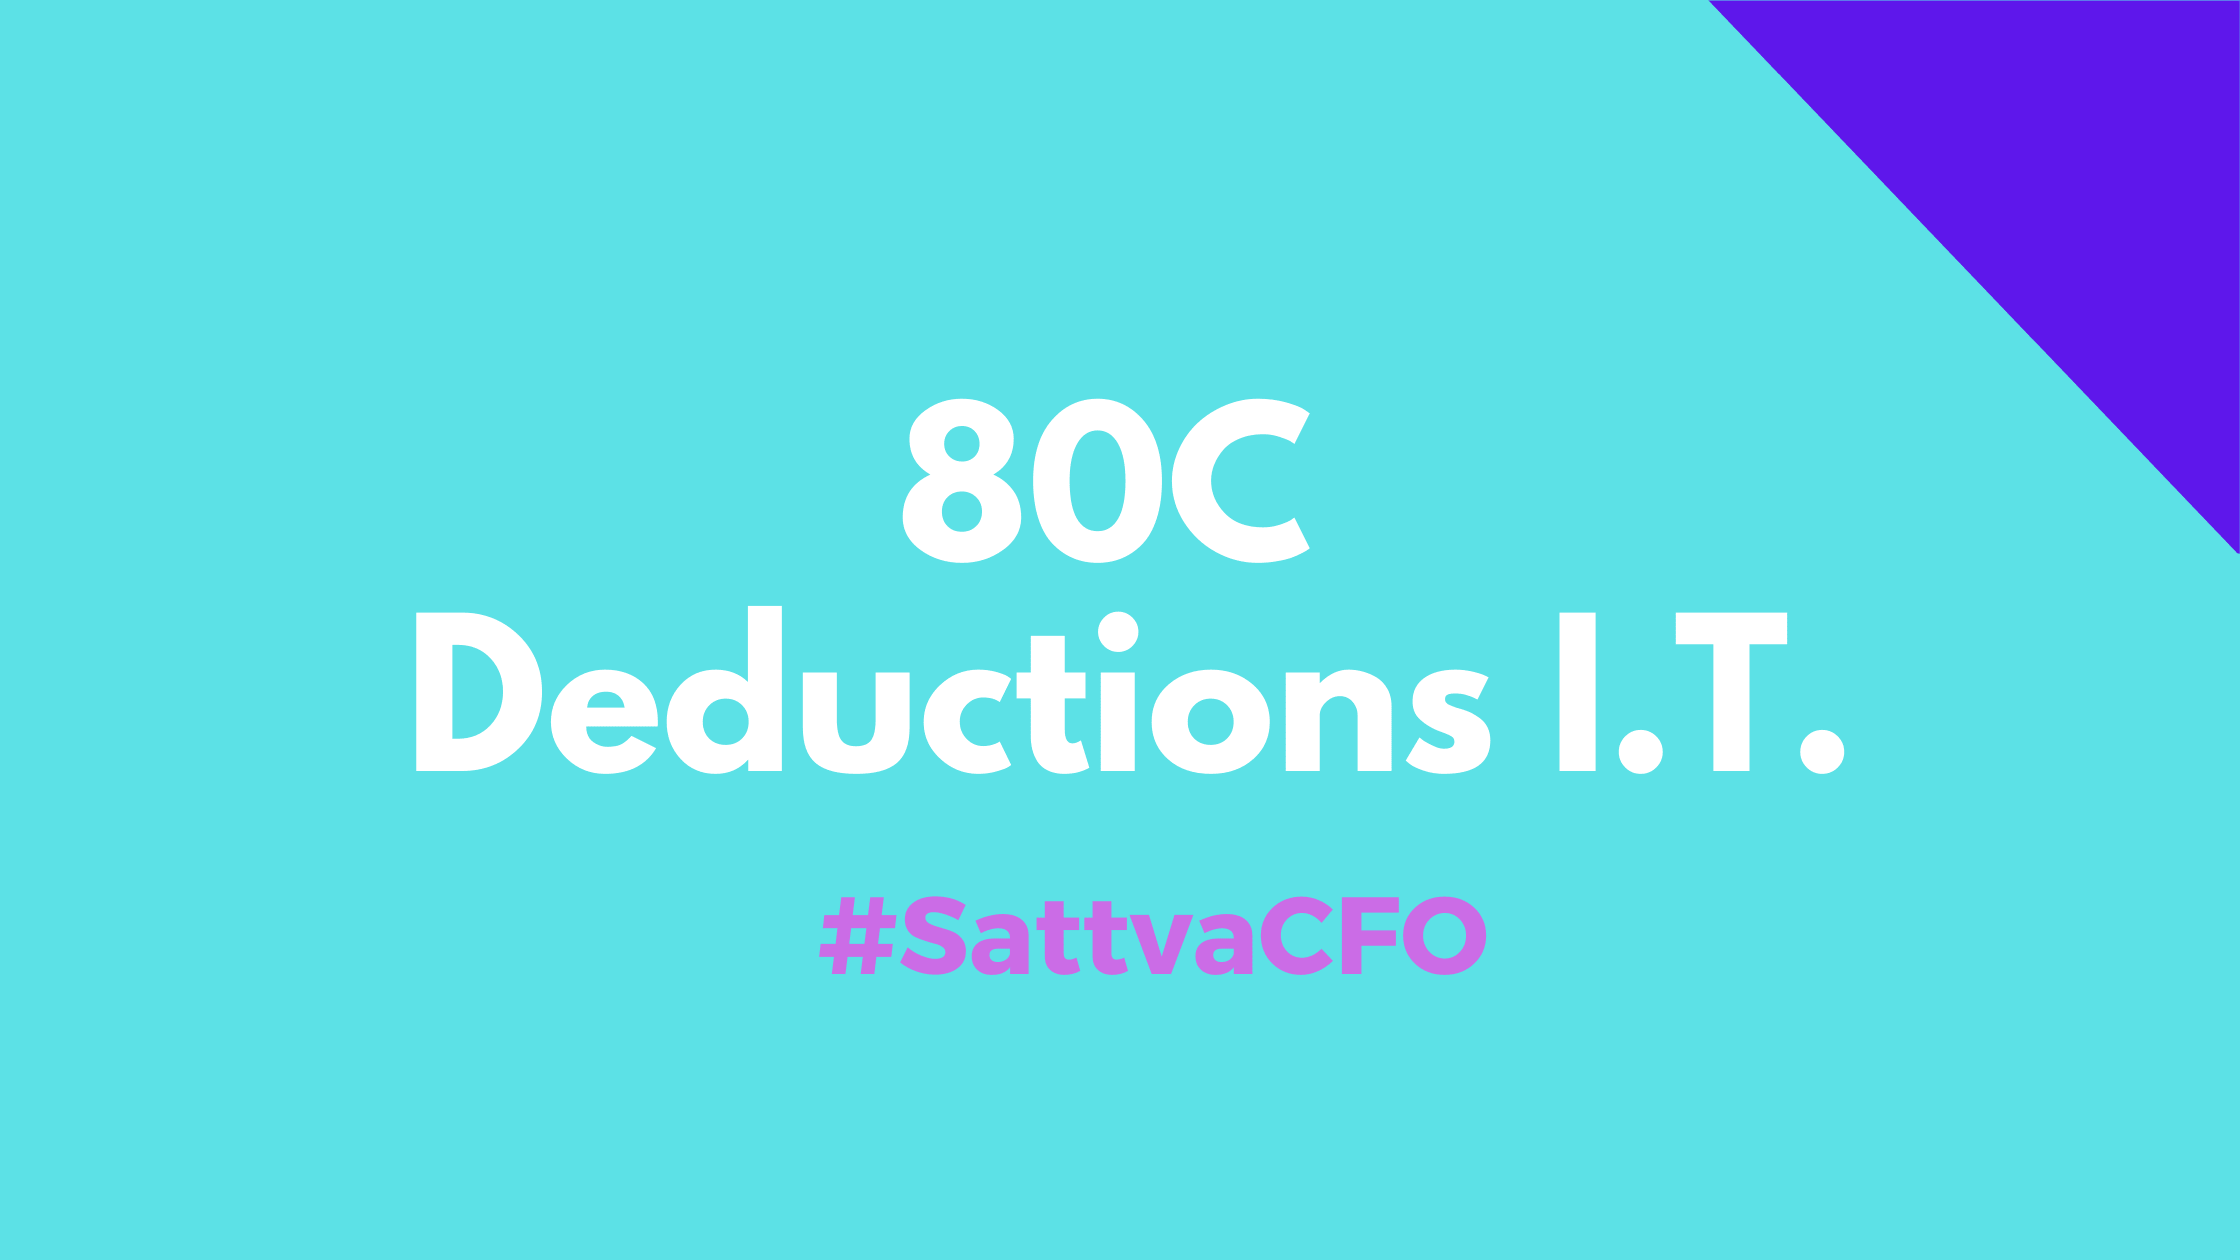 Section 80C deductions | Income Tax | SattvaCFO